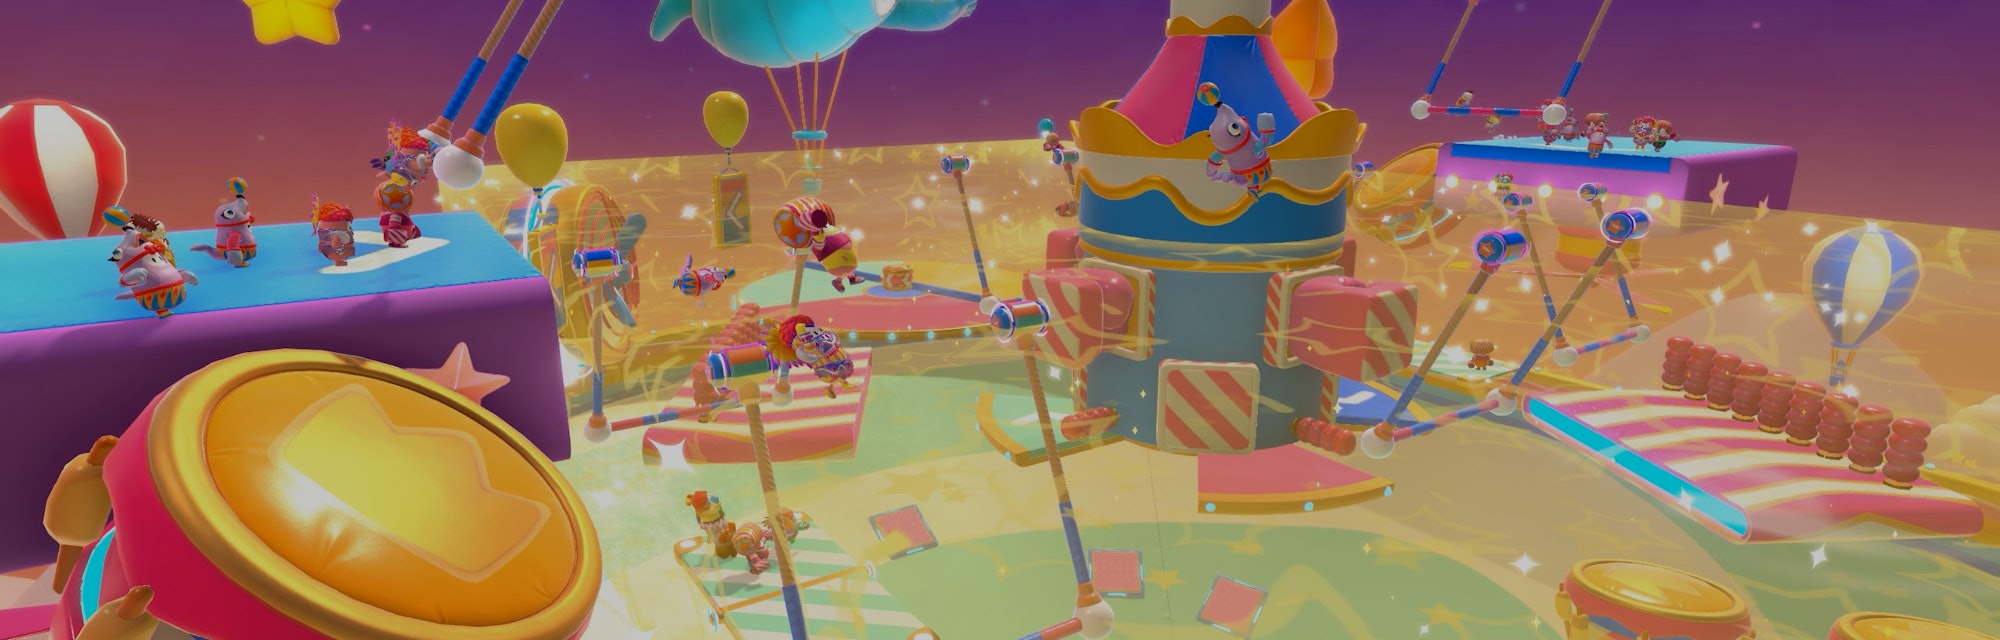 Image of Fall Guys game, showing a colorful obstacle course that resembles a circus carousel.